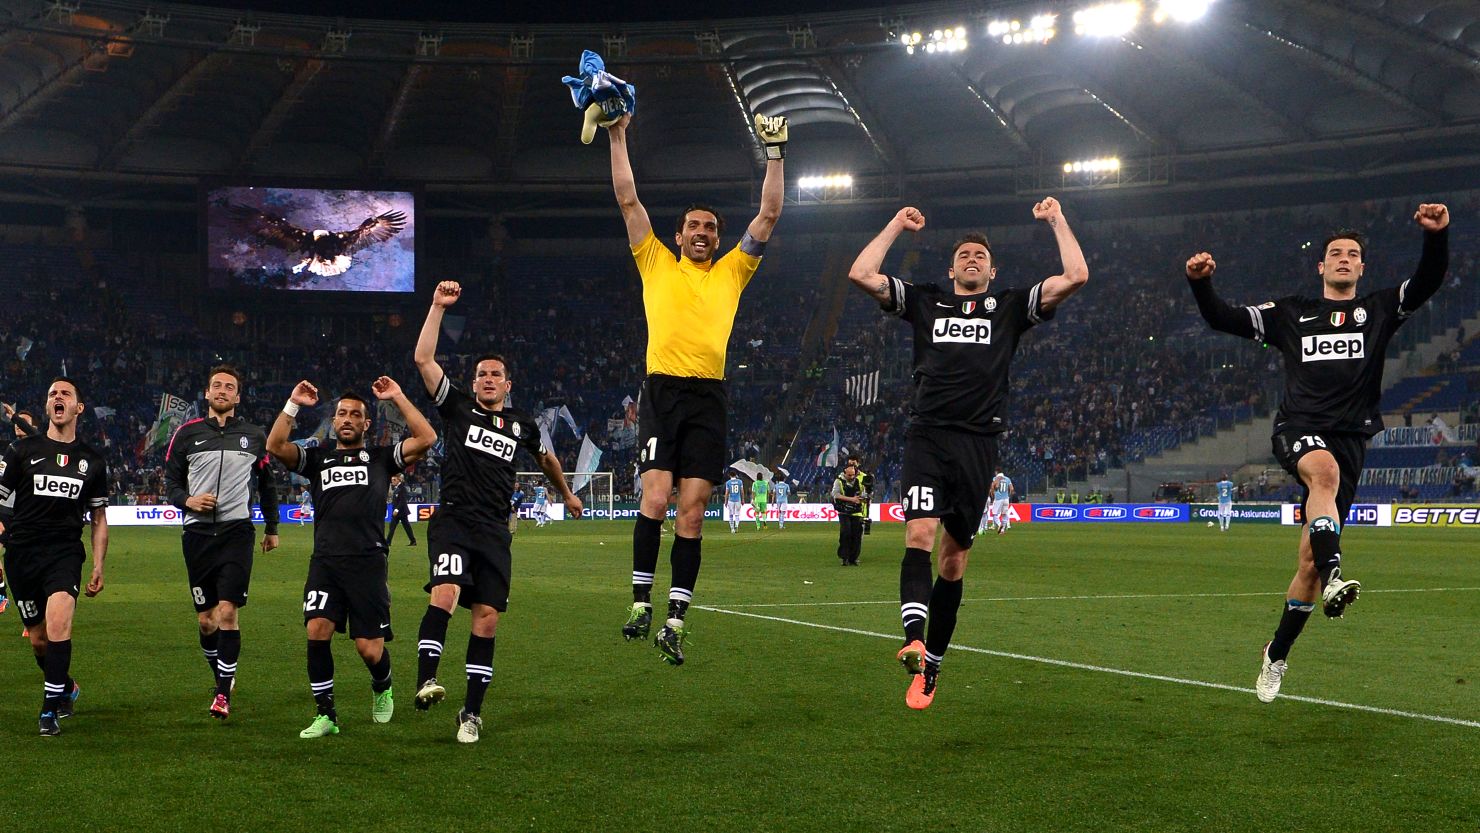 Juventus' players celebrate a decisive victory at Lazio that extends their lead at the top of Serie A to 11 points